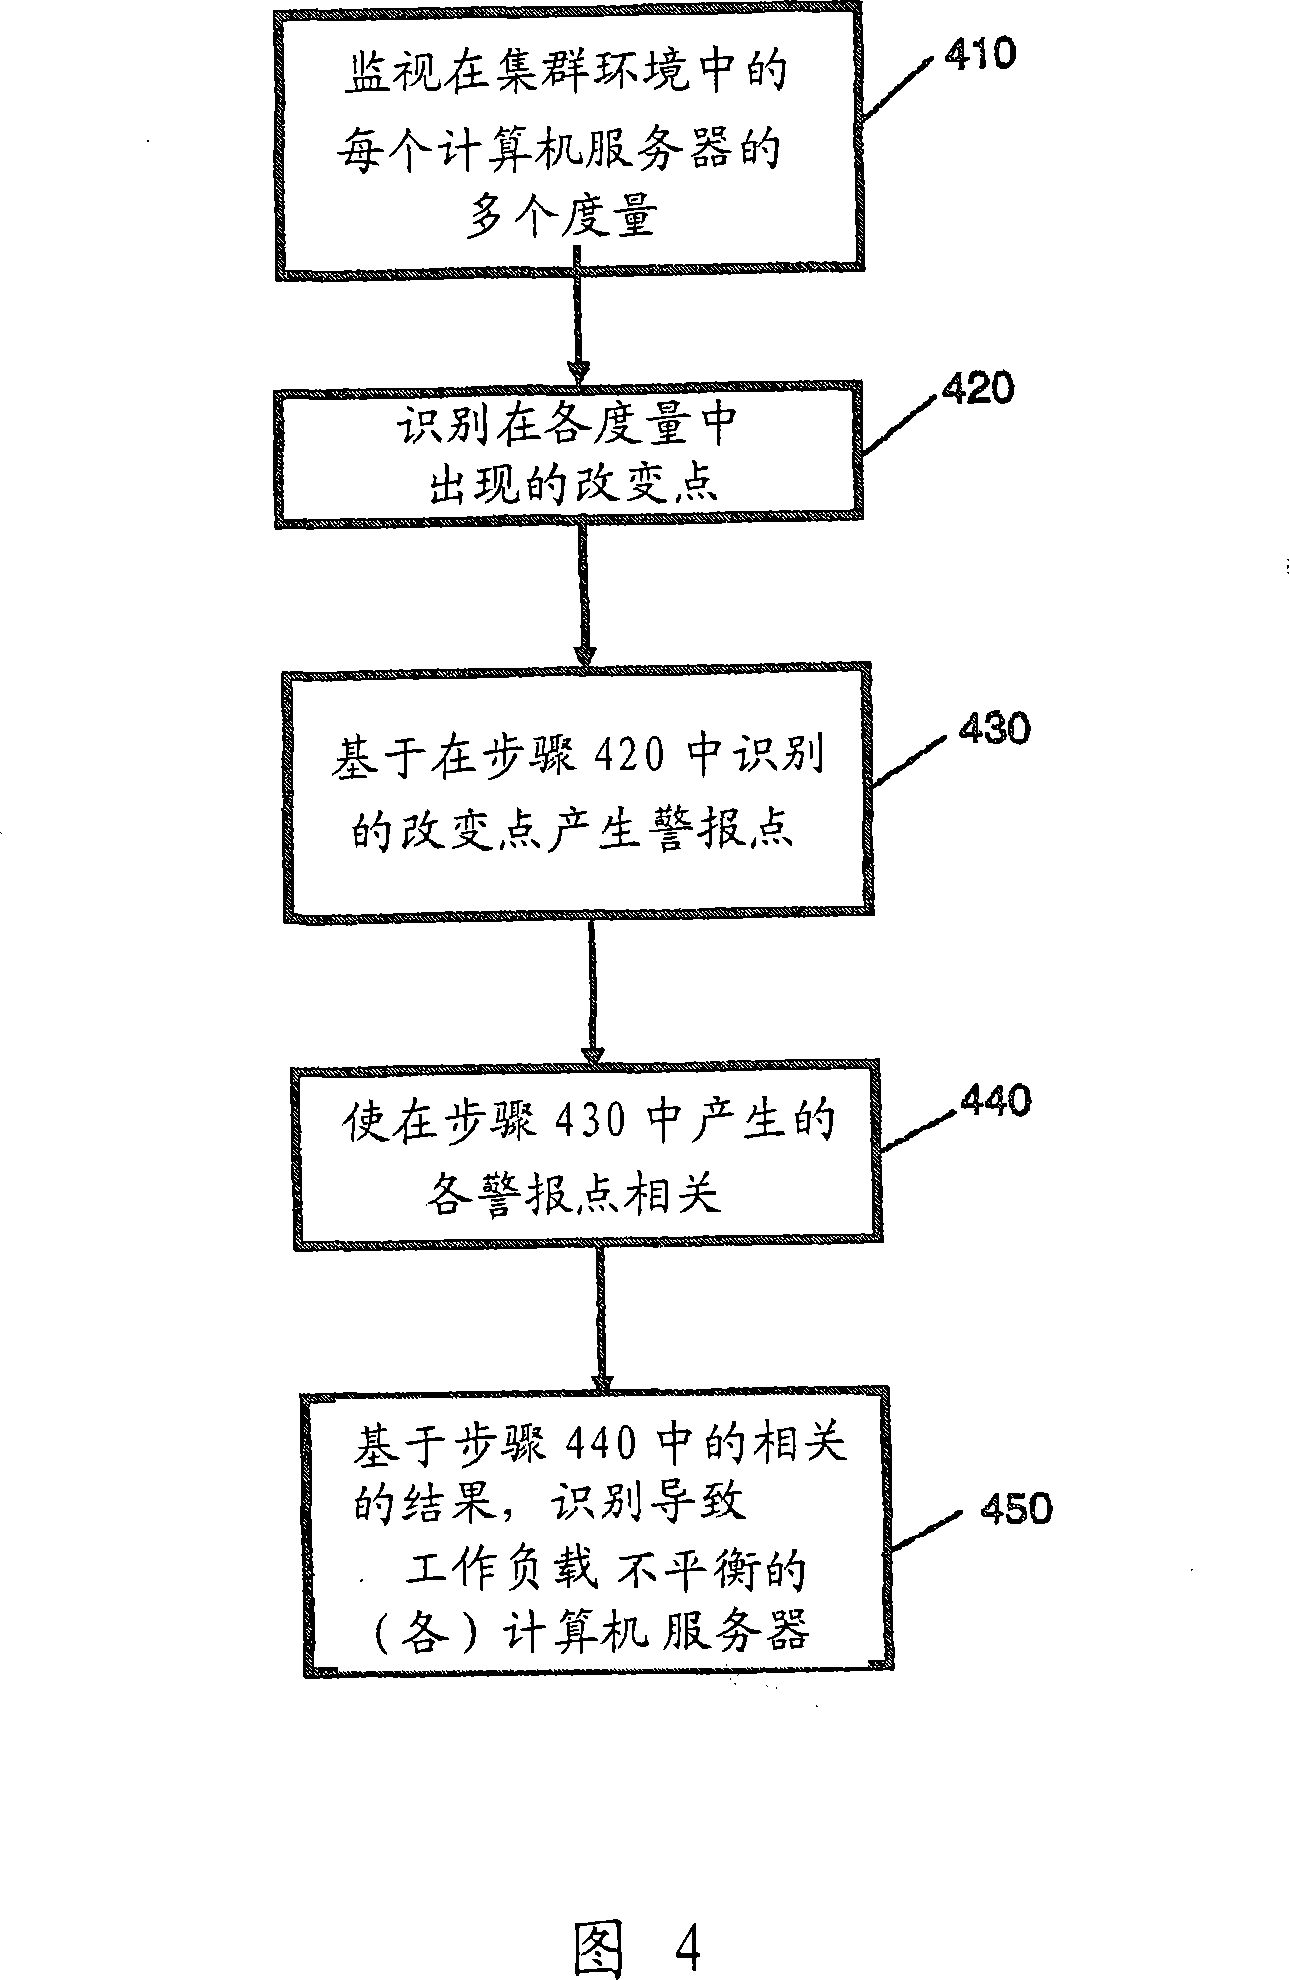 System and method for detecting imbalances in dynamic workload scheduling in clustered environments